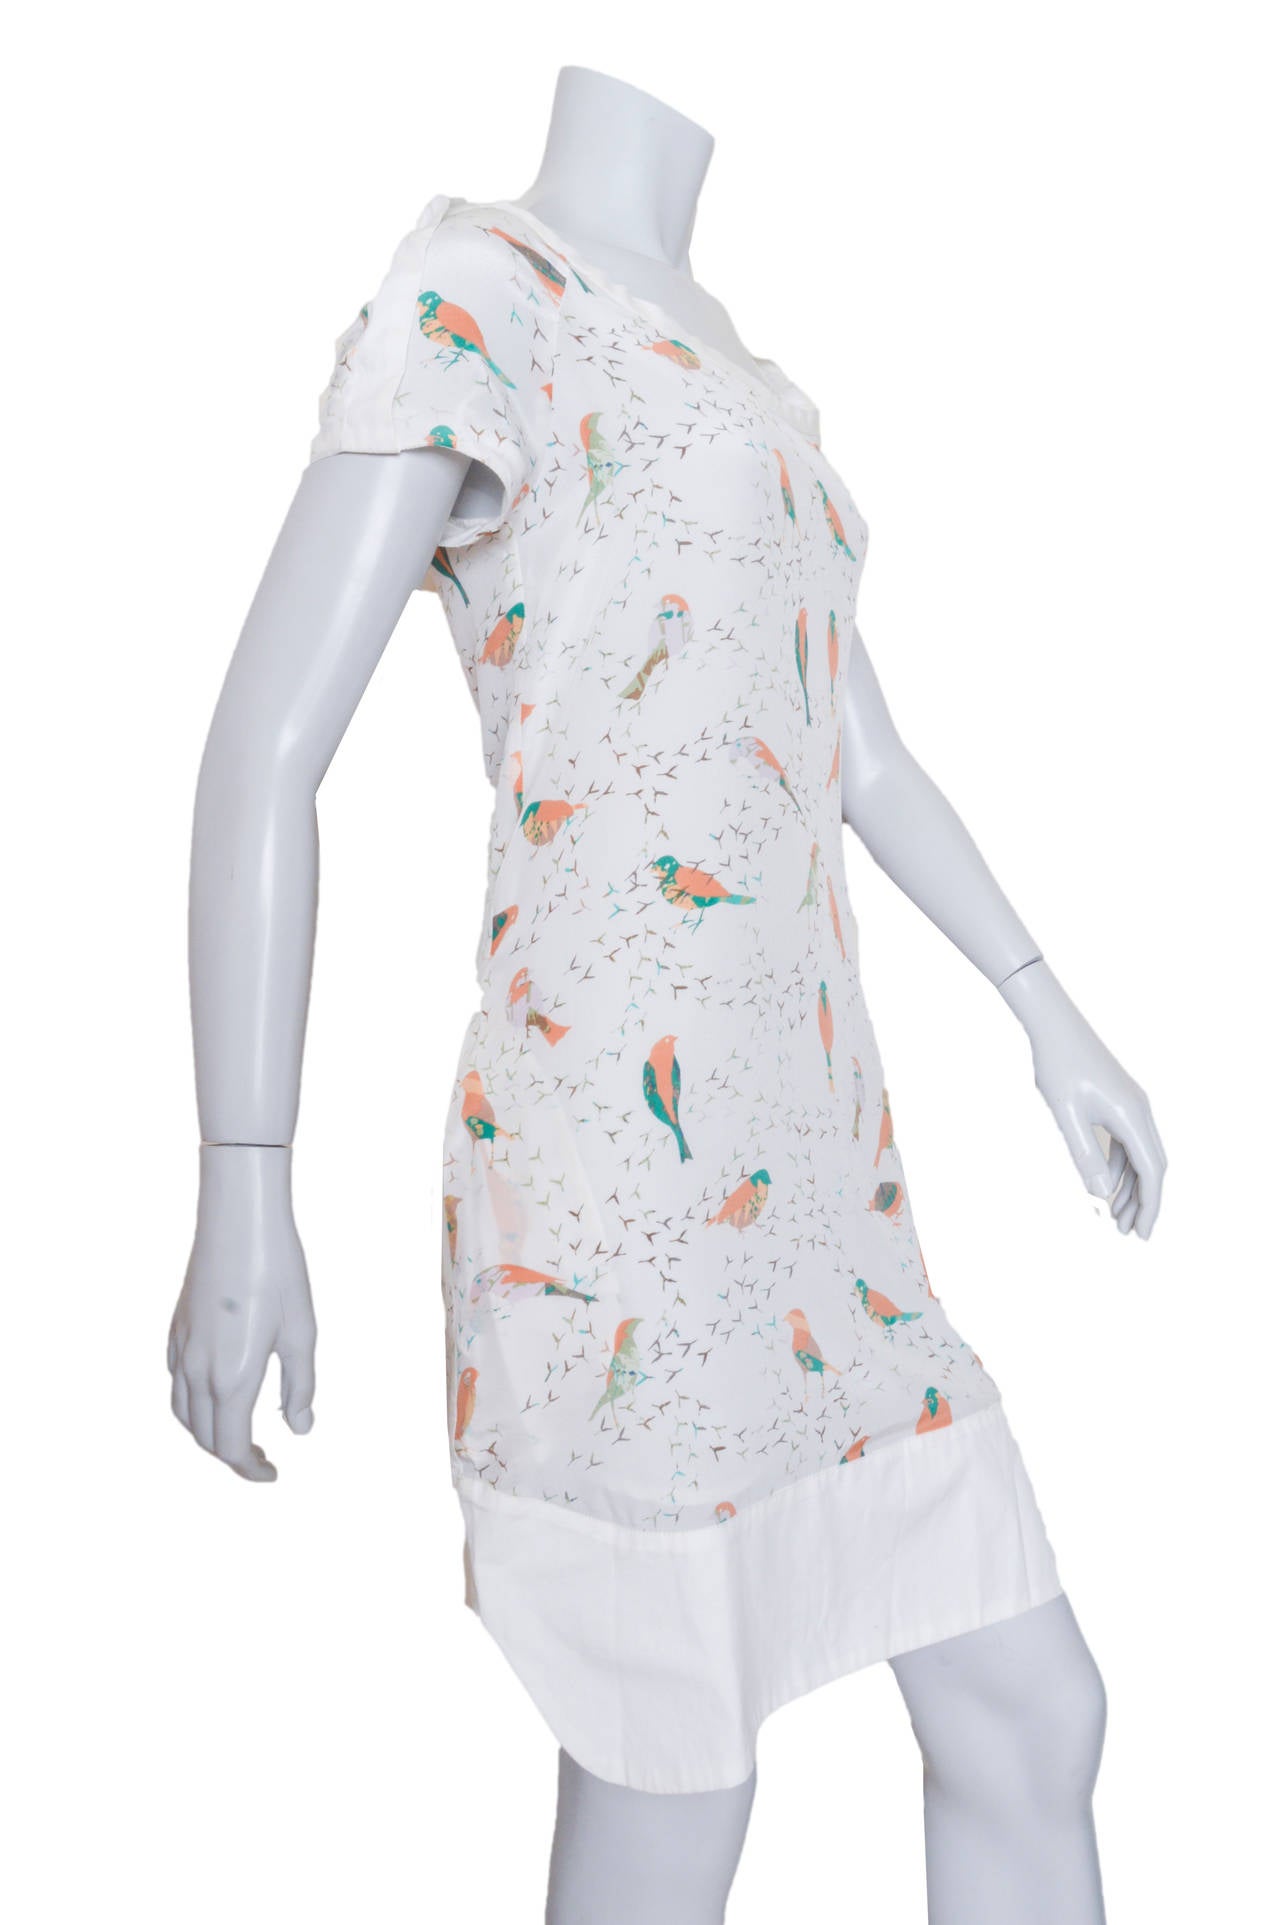 Ethereal See by Chloe shift dress with bird print.
Cap sleeve with banded scoop neck and band at hem.
HIdden side pockets.
Lined.
Tagged a US size 10.